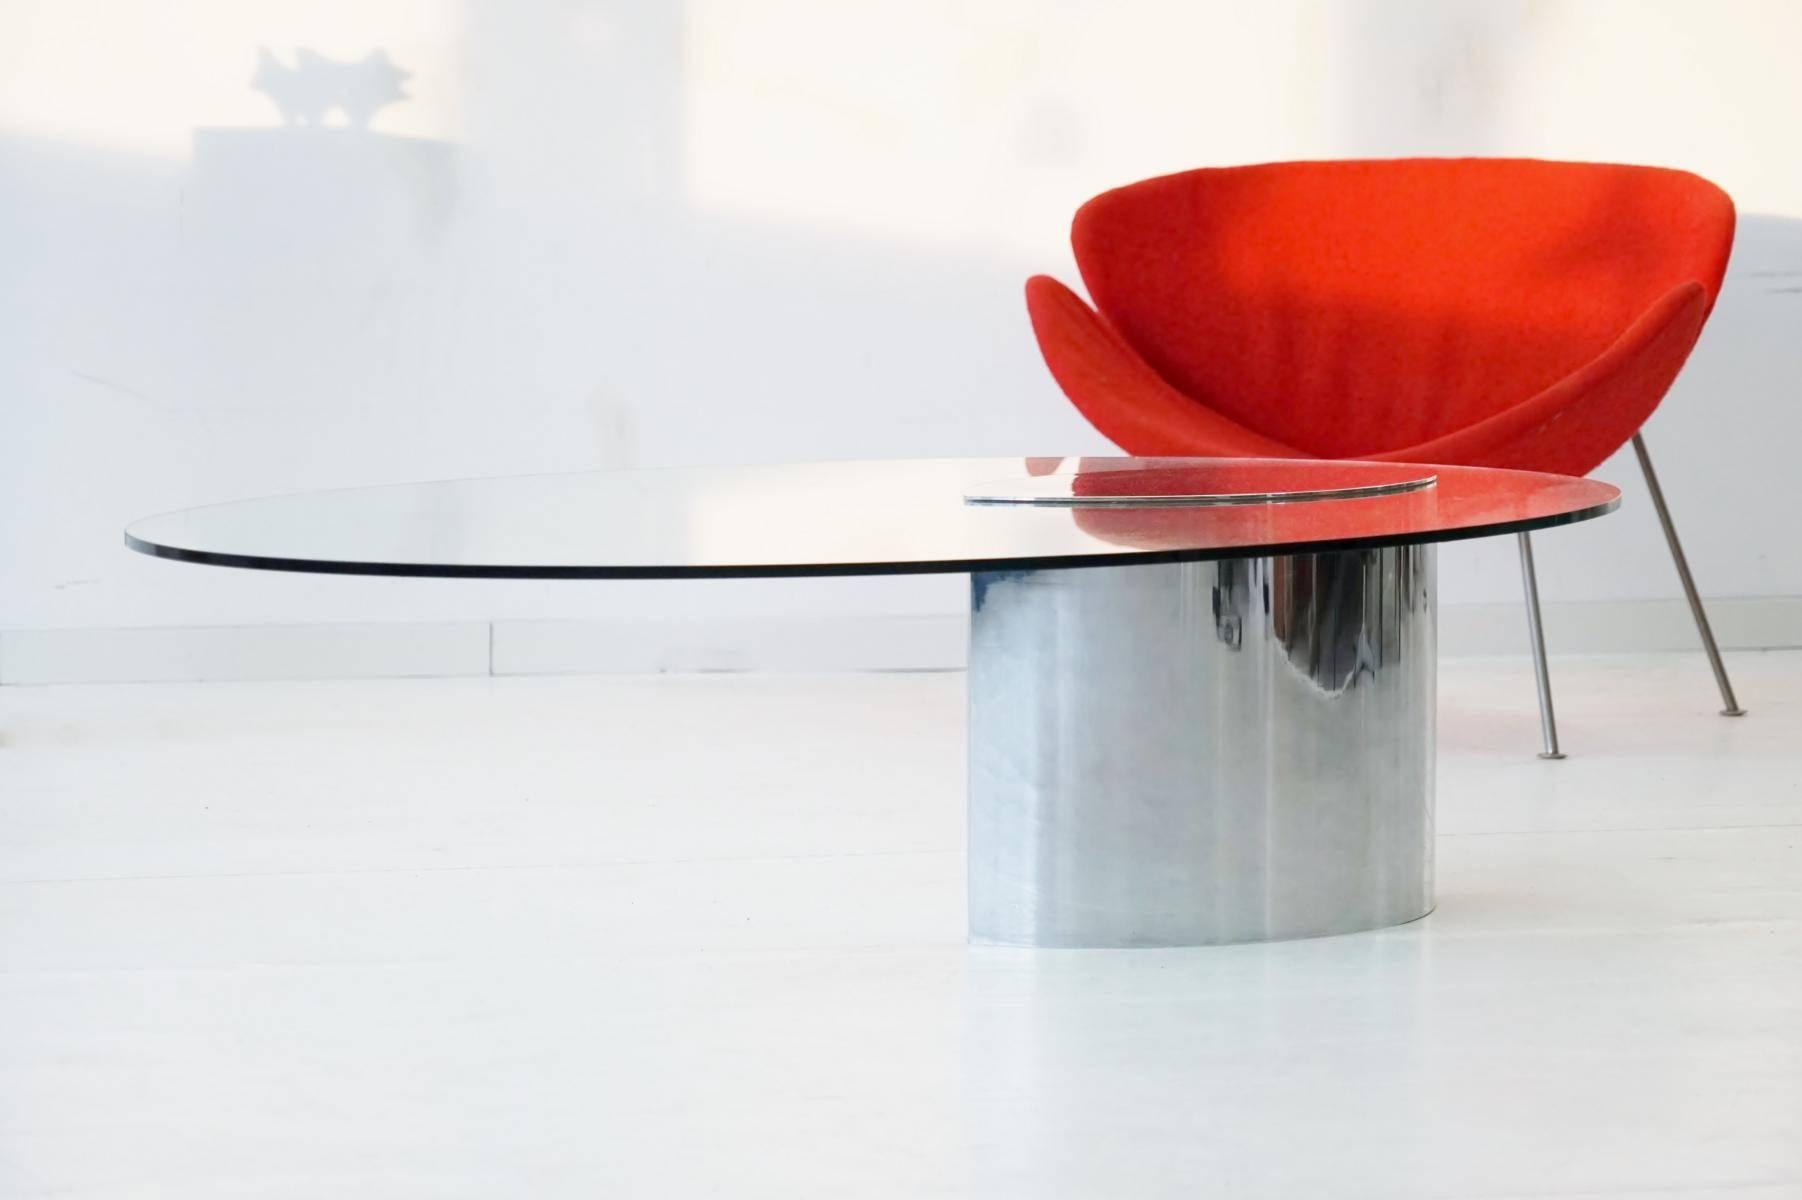 Mid-Century Modern Sofa Couch Glass Coffee Side Table Lunario by Cini Boeri for Gavina, 1970s Italy